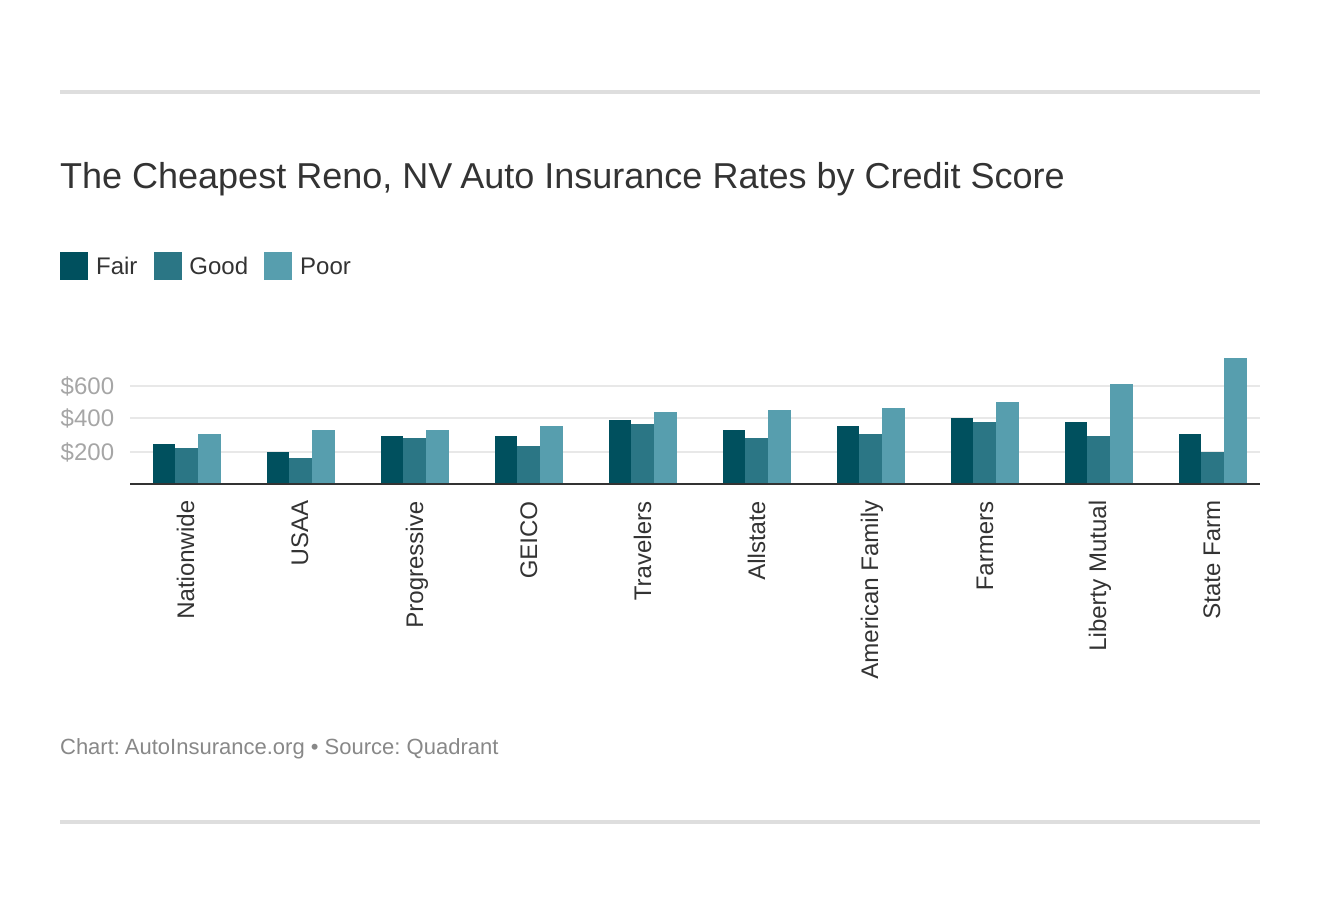 The Cheapest Reno, NV Auto Insurance Rates by Credit Score